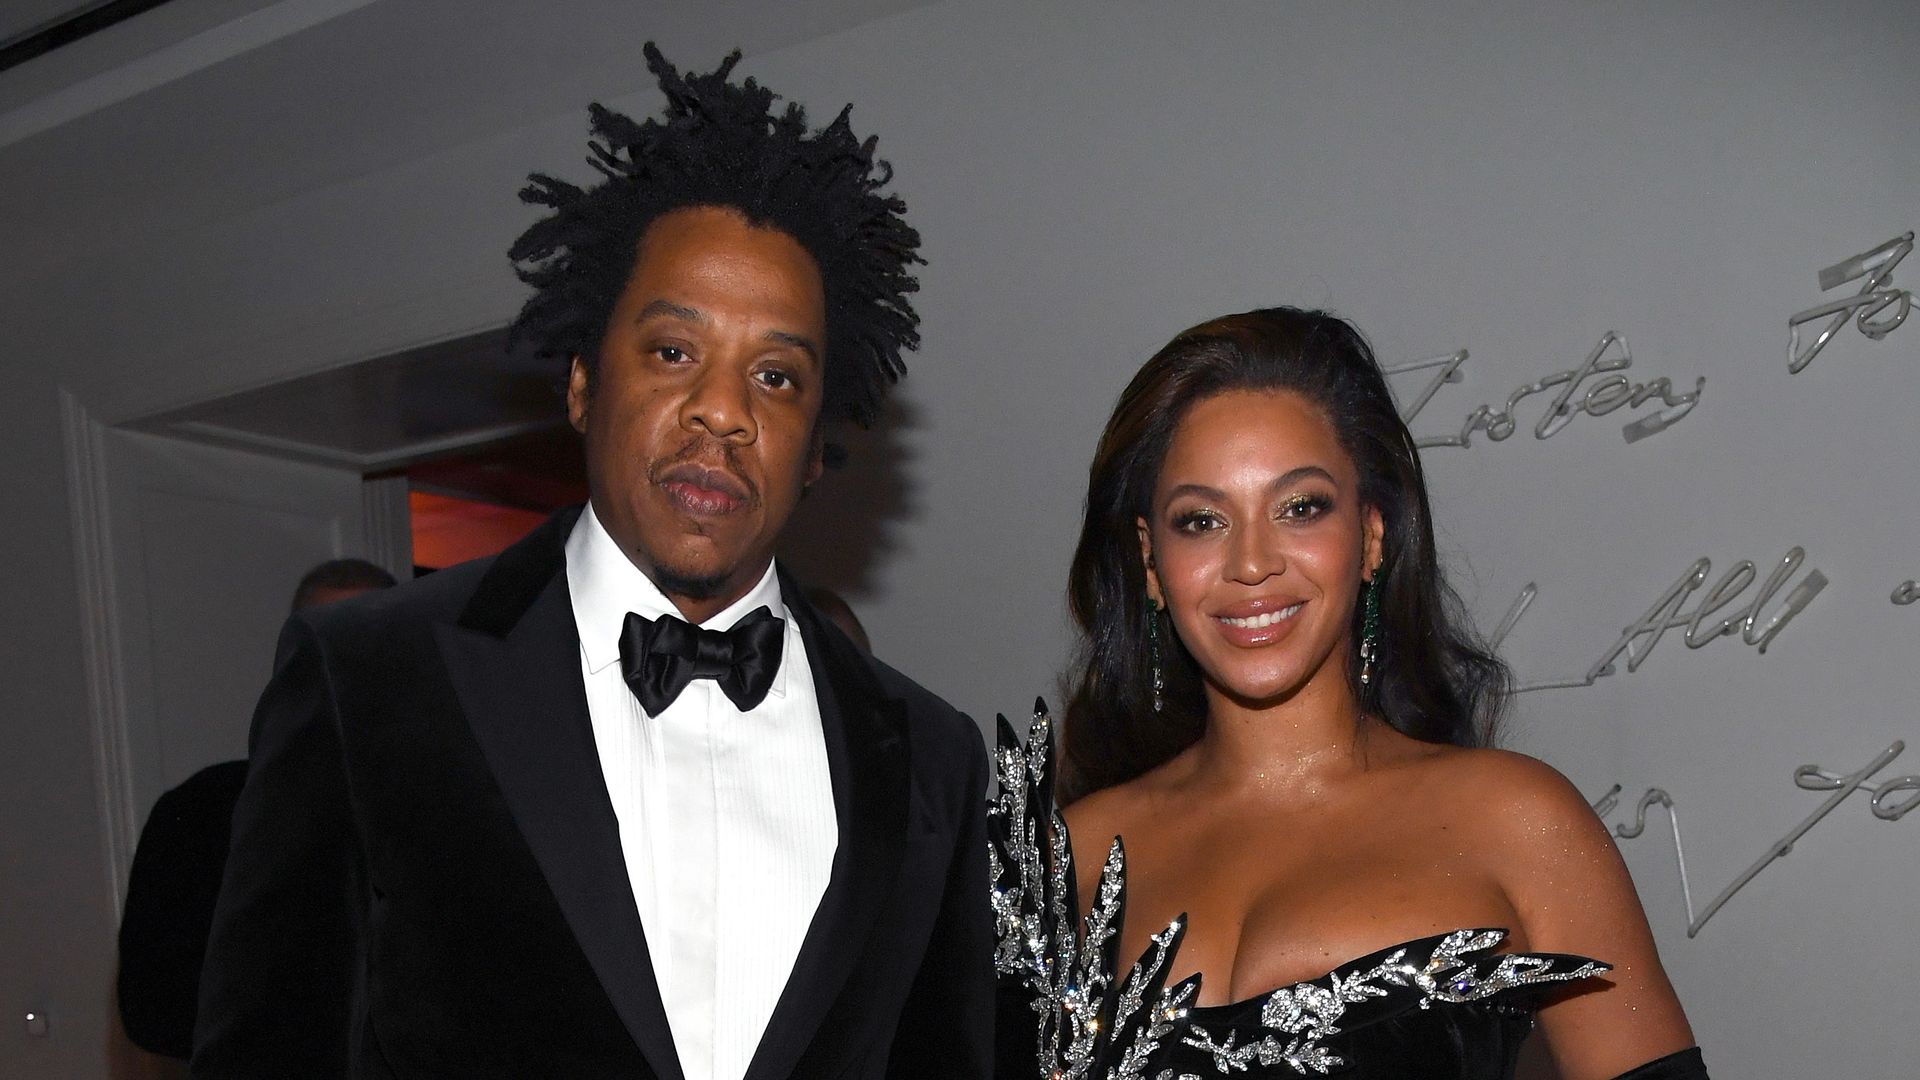 Both Beyoncè and Jay Z have been the centre of Illuminati conspiracy theories